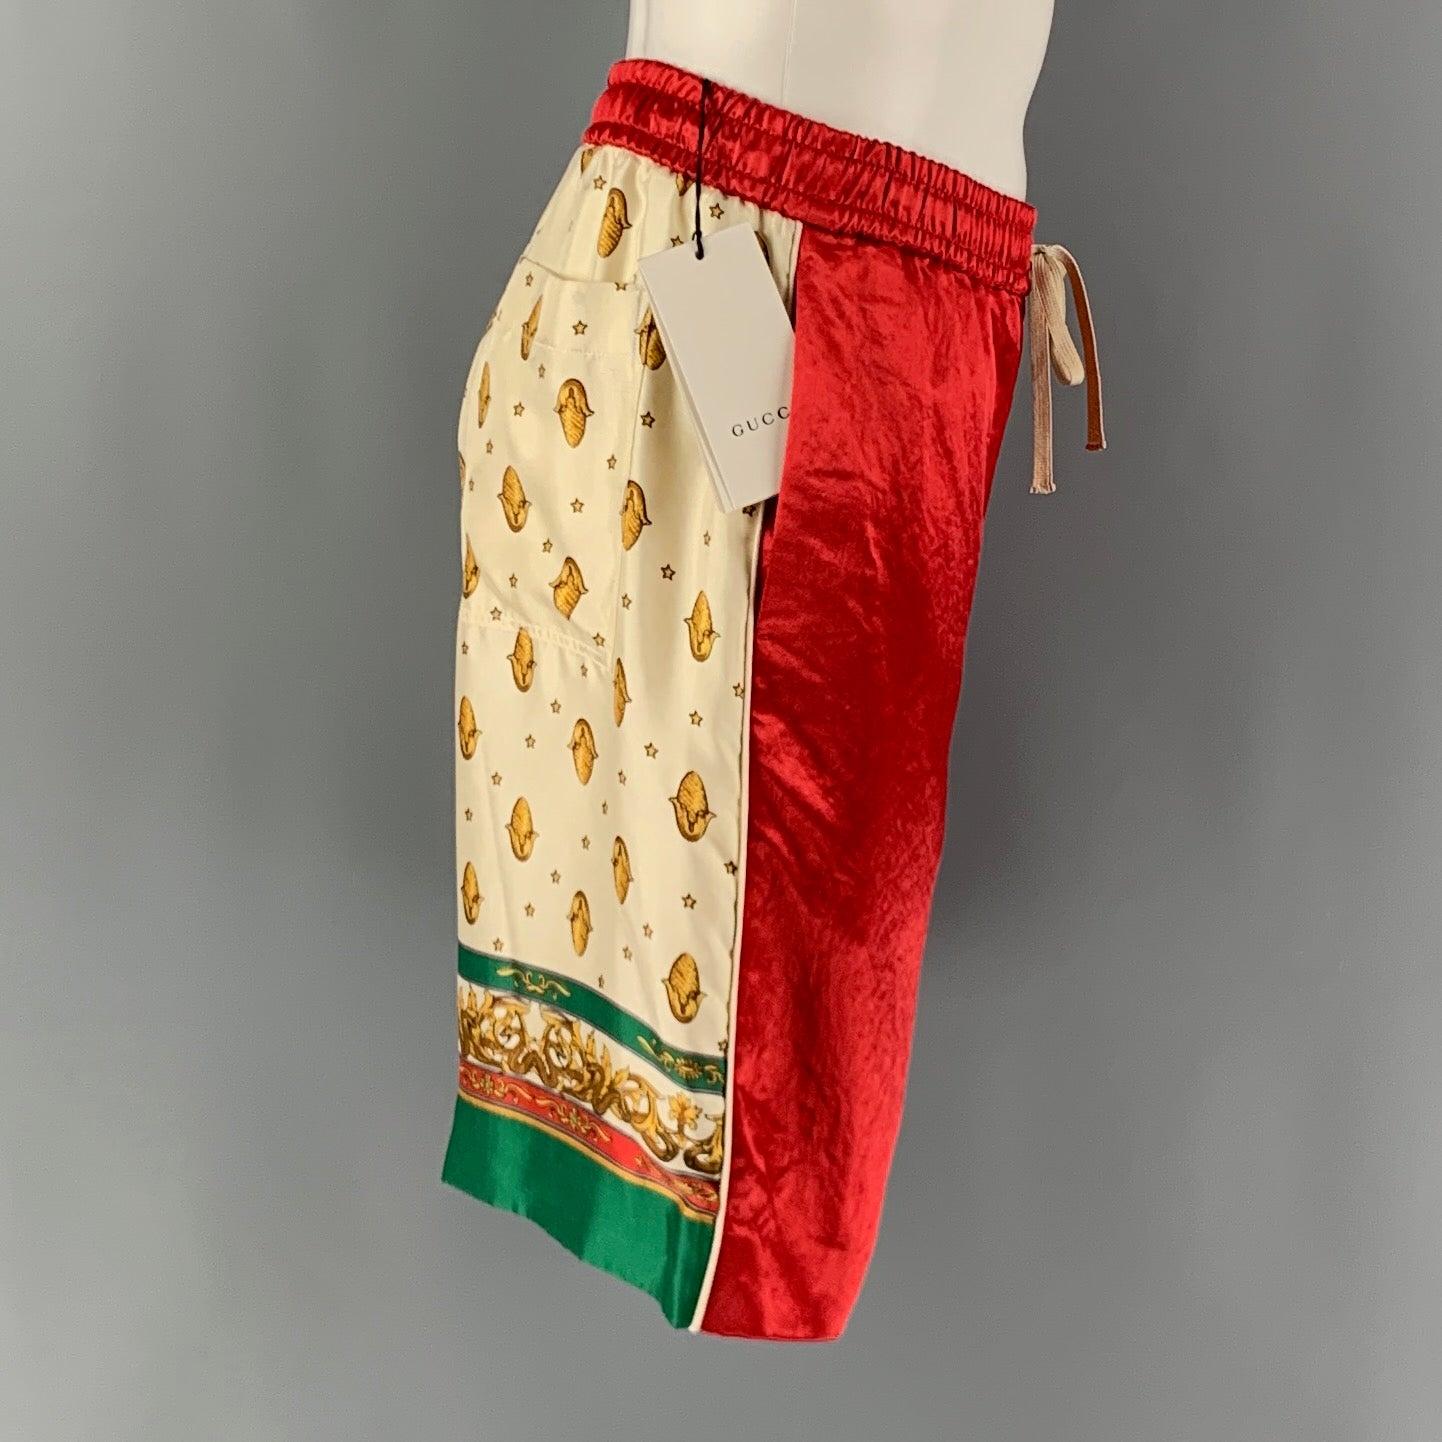 GUCCI acetate shorts, features a red front, beige and green back with a snake, and stars print. Slit Pockets & Drawstring Closure.
 Made in Italy.New with Tags 

Marked:   46 

Measurements: 
  Waist: 33 inches Rise: 11.5 inInseam: 9.5 inches Leg